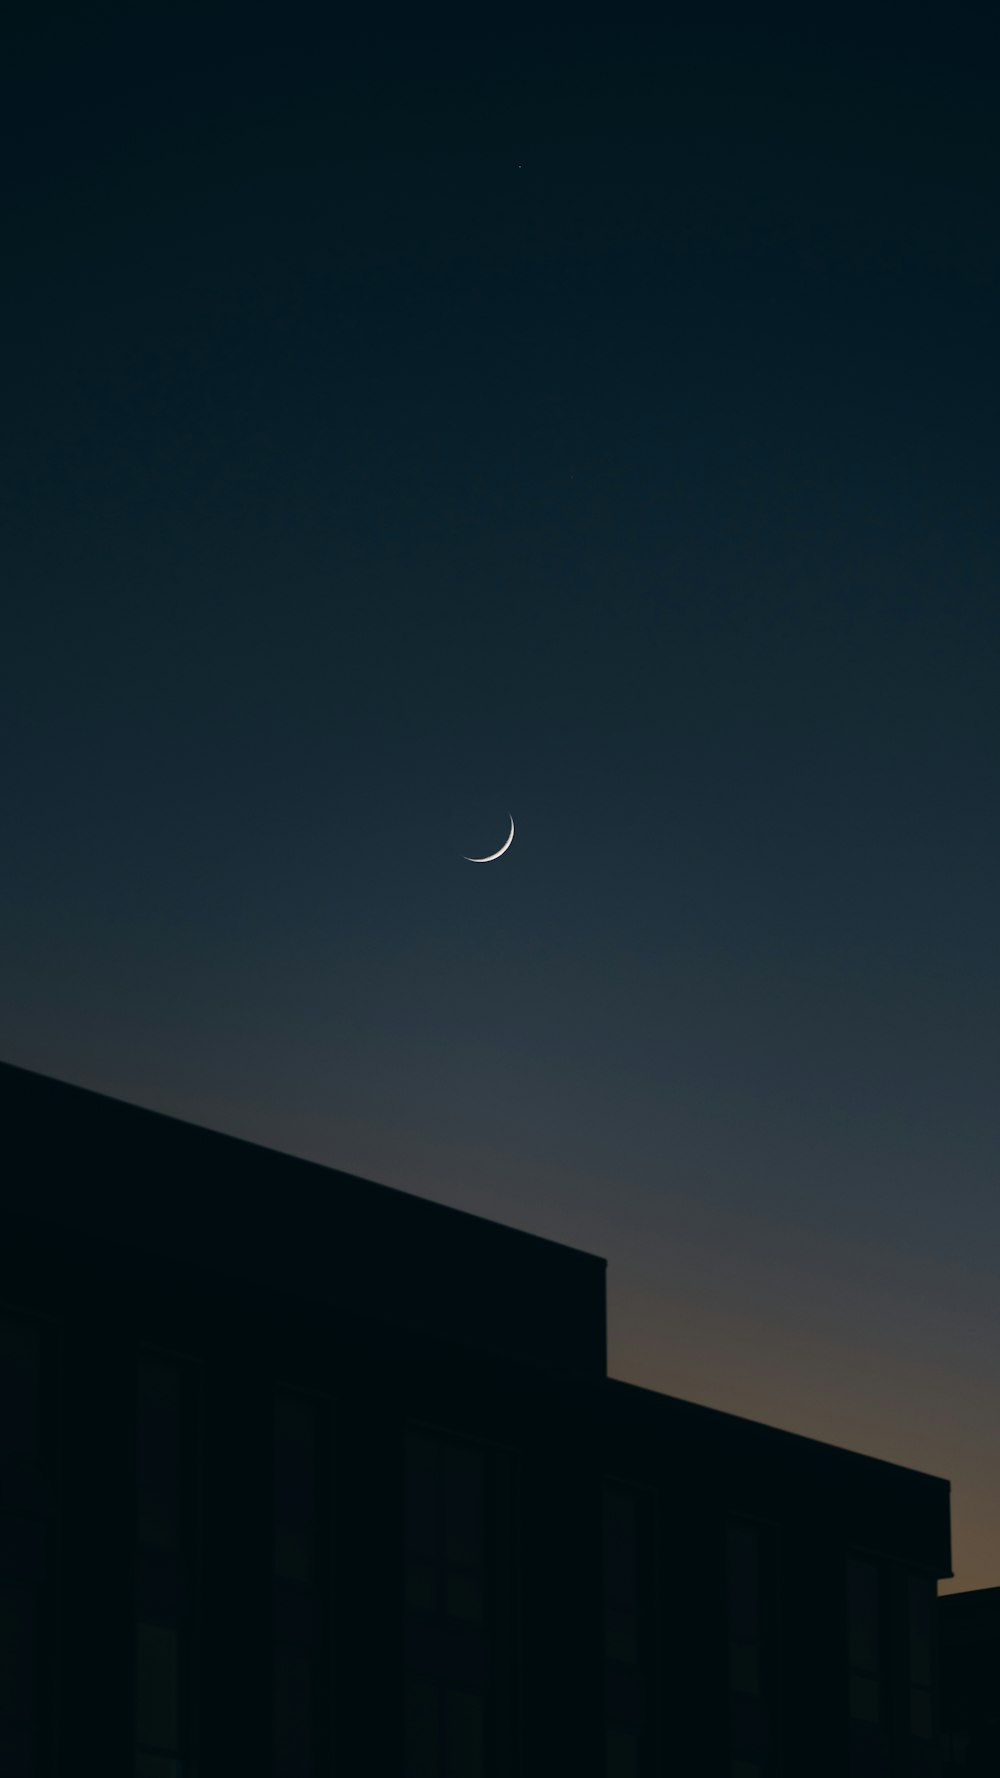 the moon and venus in the night sky